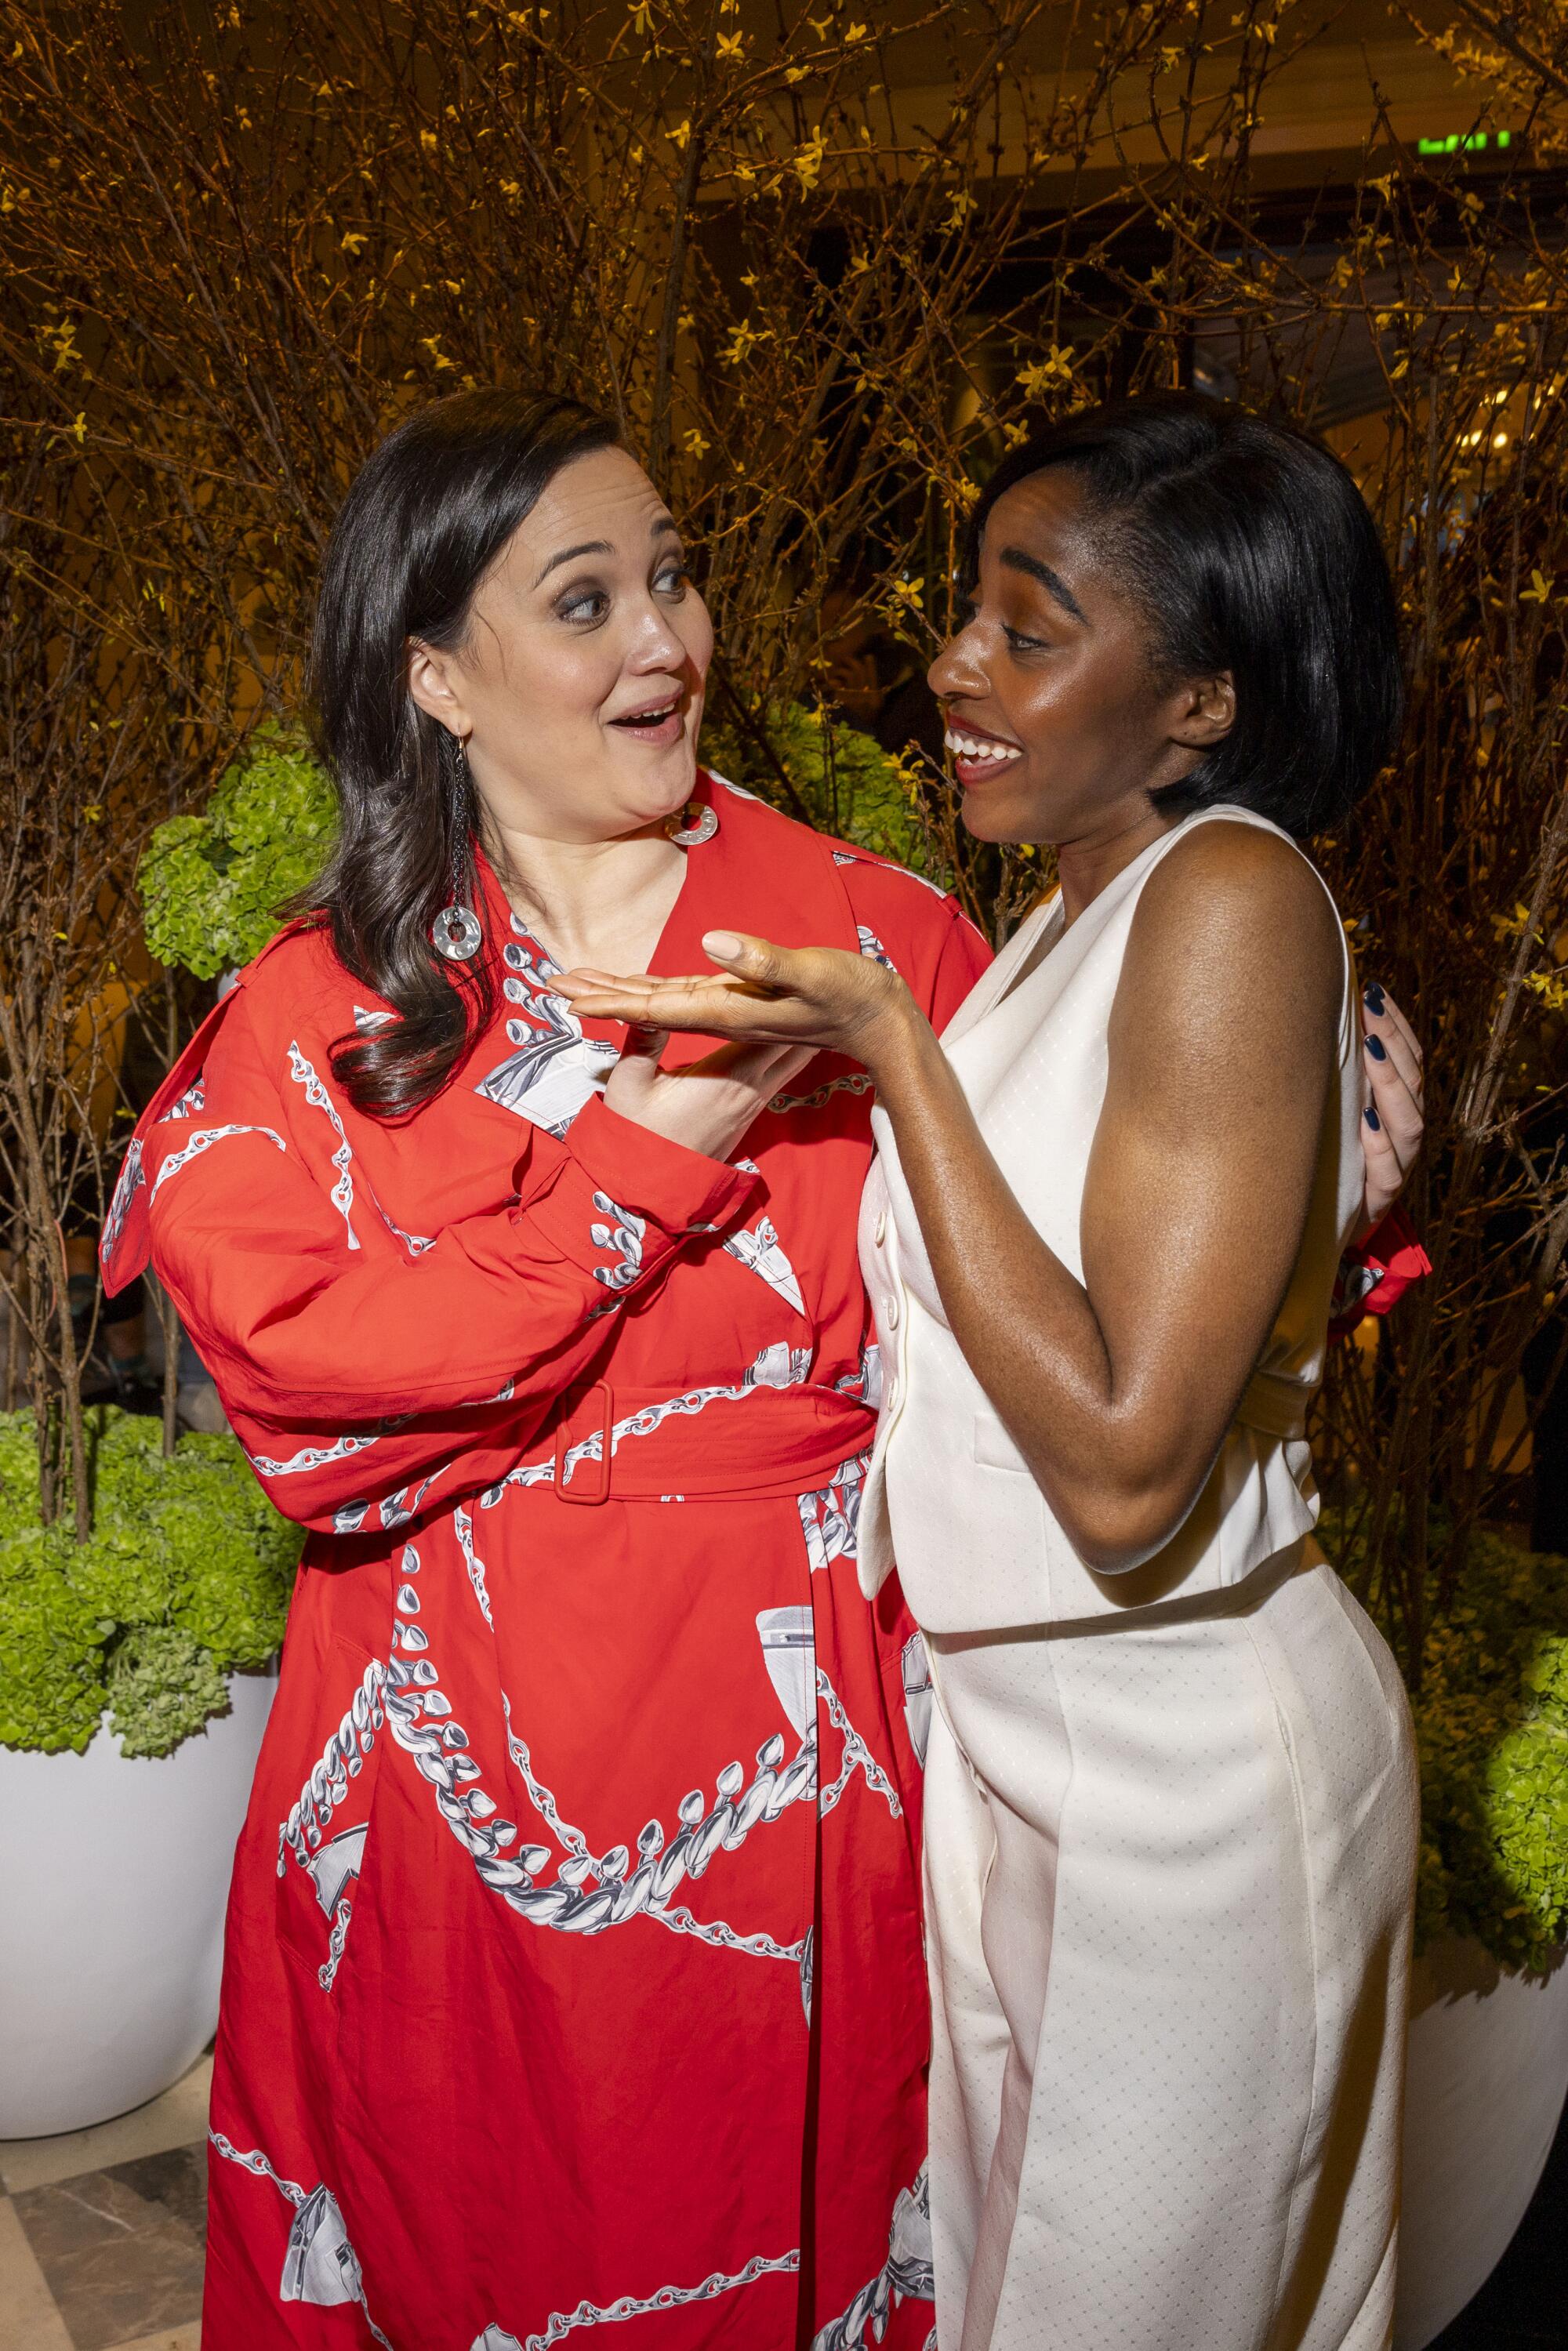 Two women clowning around at a party